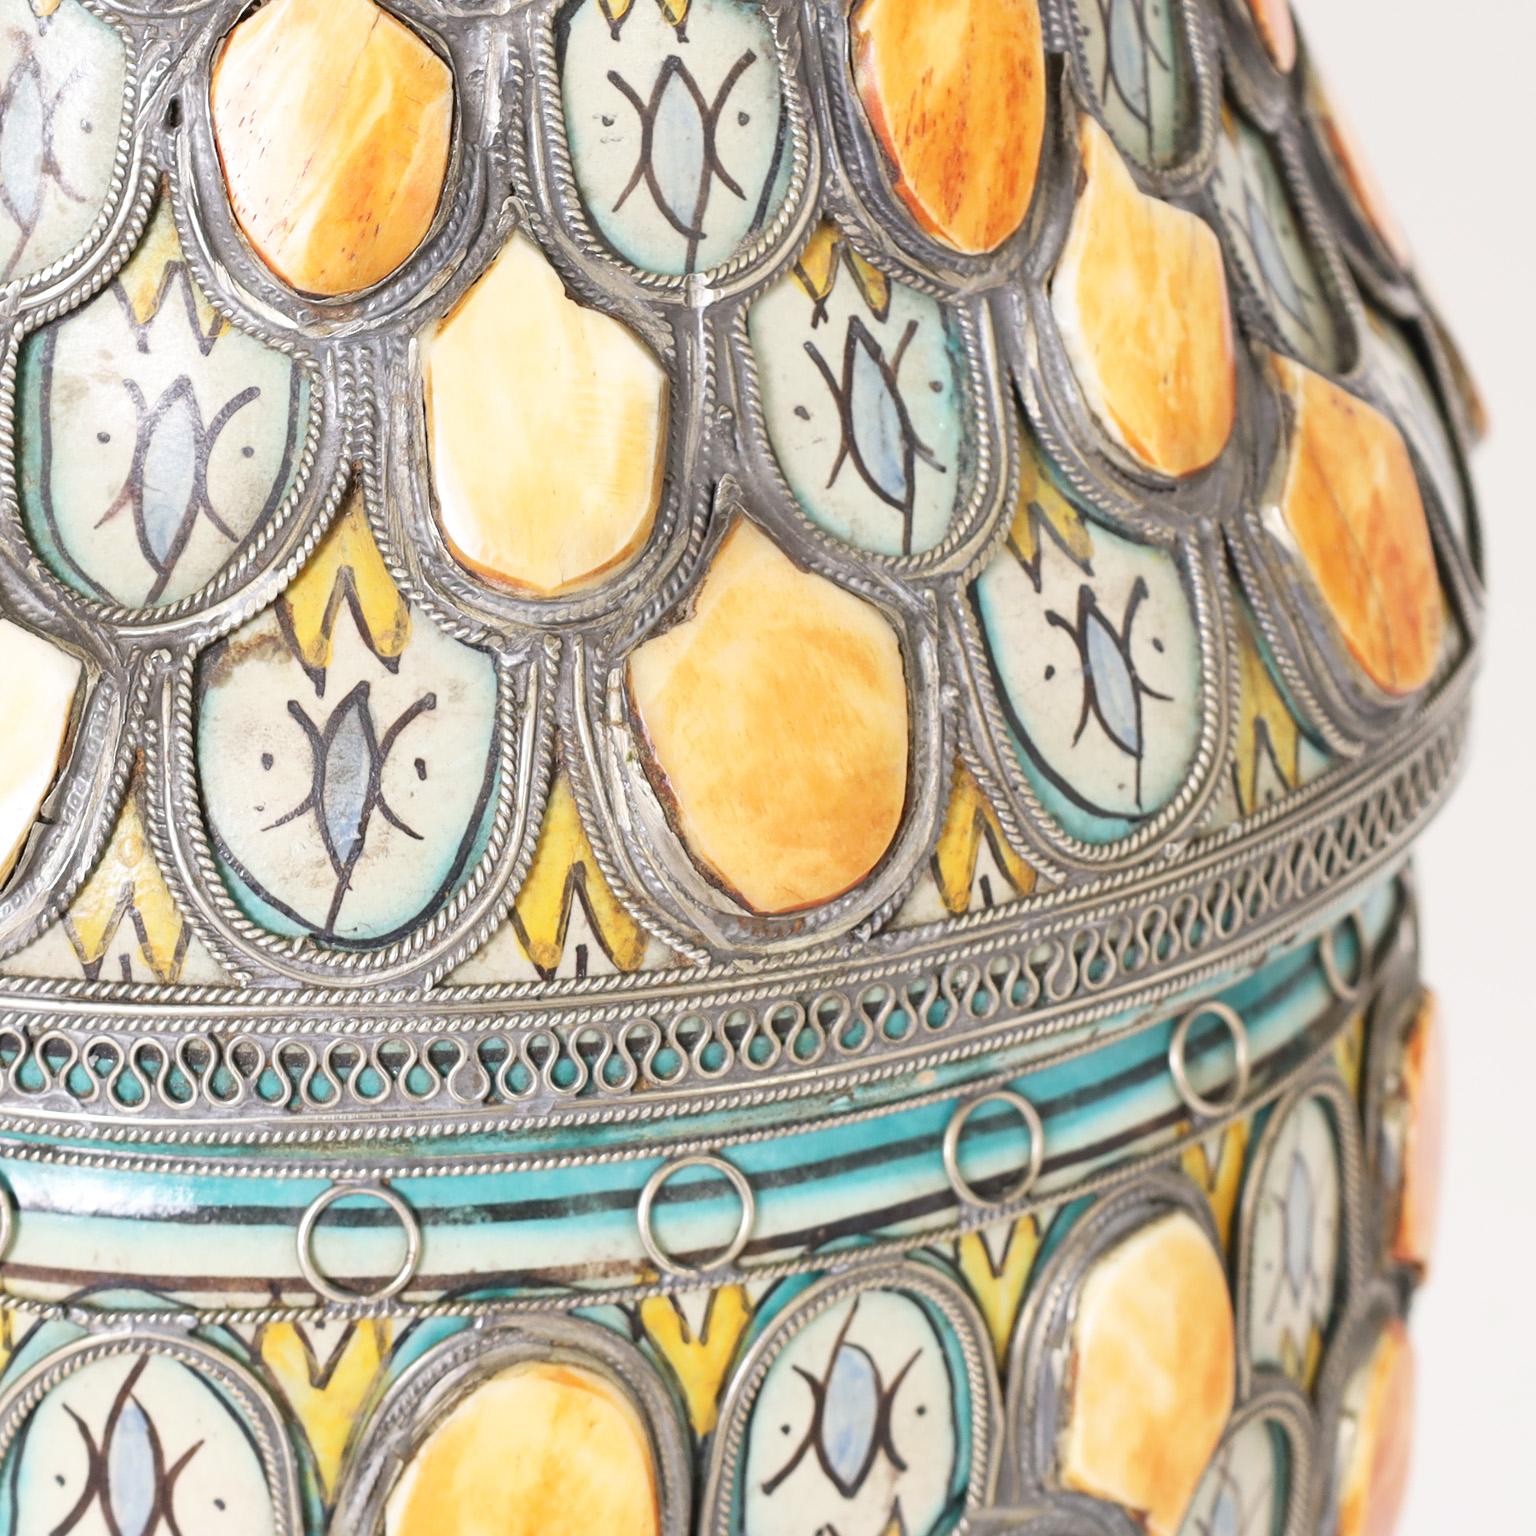 Hand-Crafted Moroccan Earthenware and Metal Lidded Jar